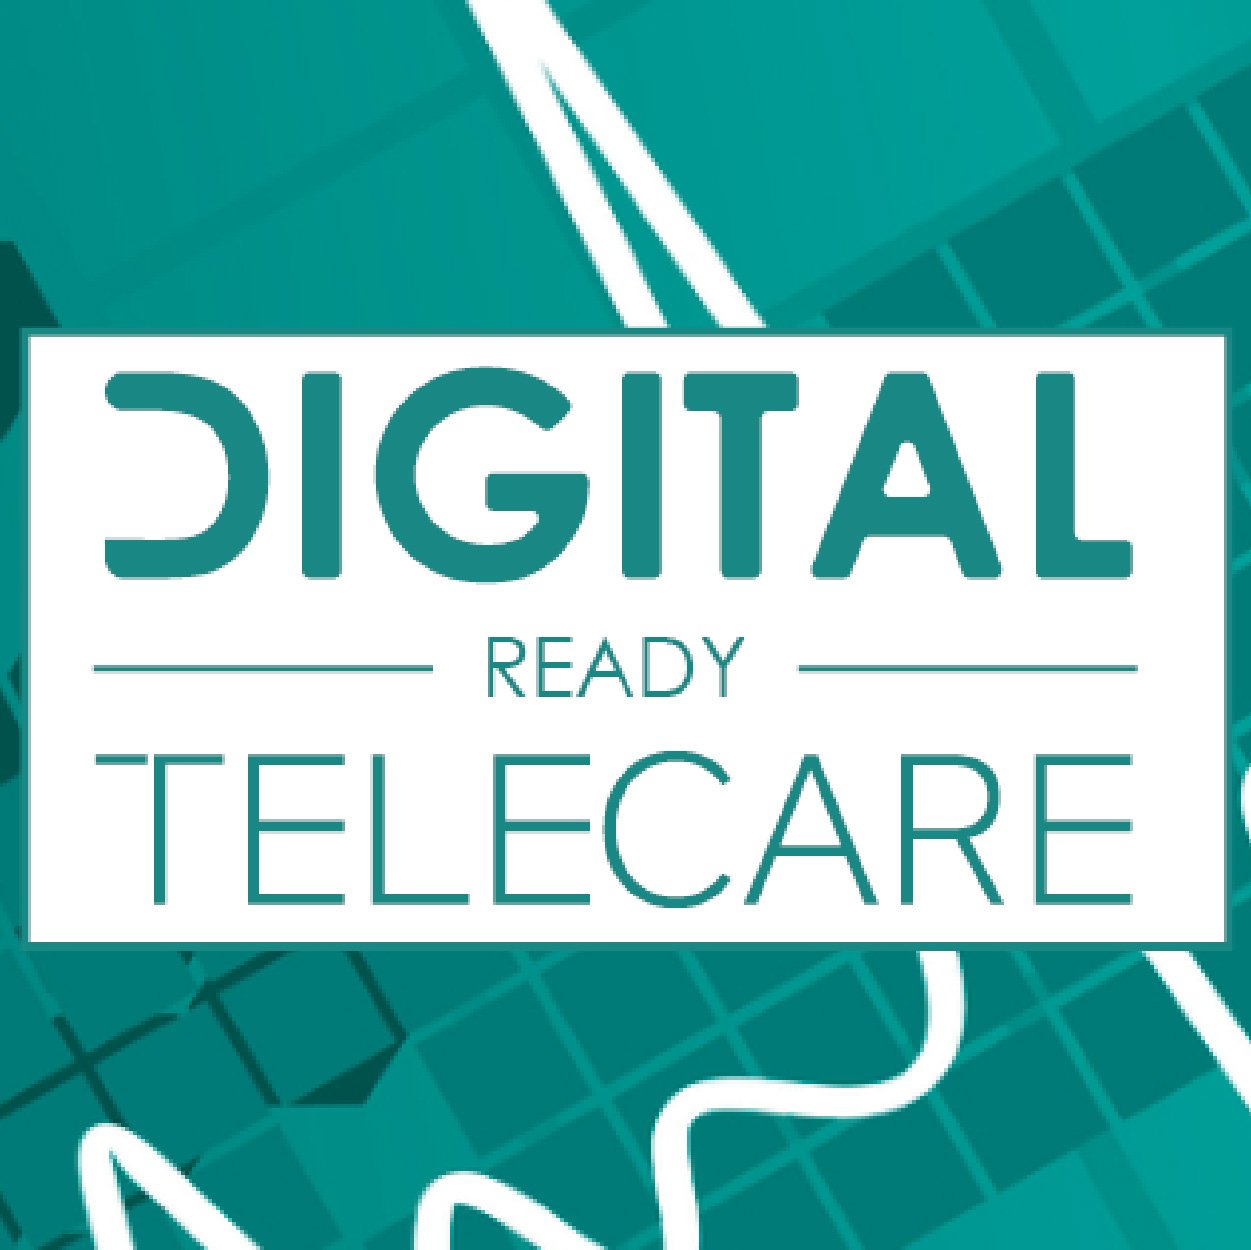 Are you ready for the digital switch? Complete your simple 10 question telecare healthcheck to find out...